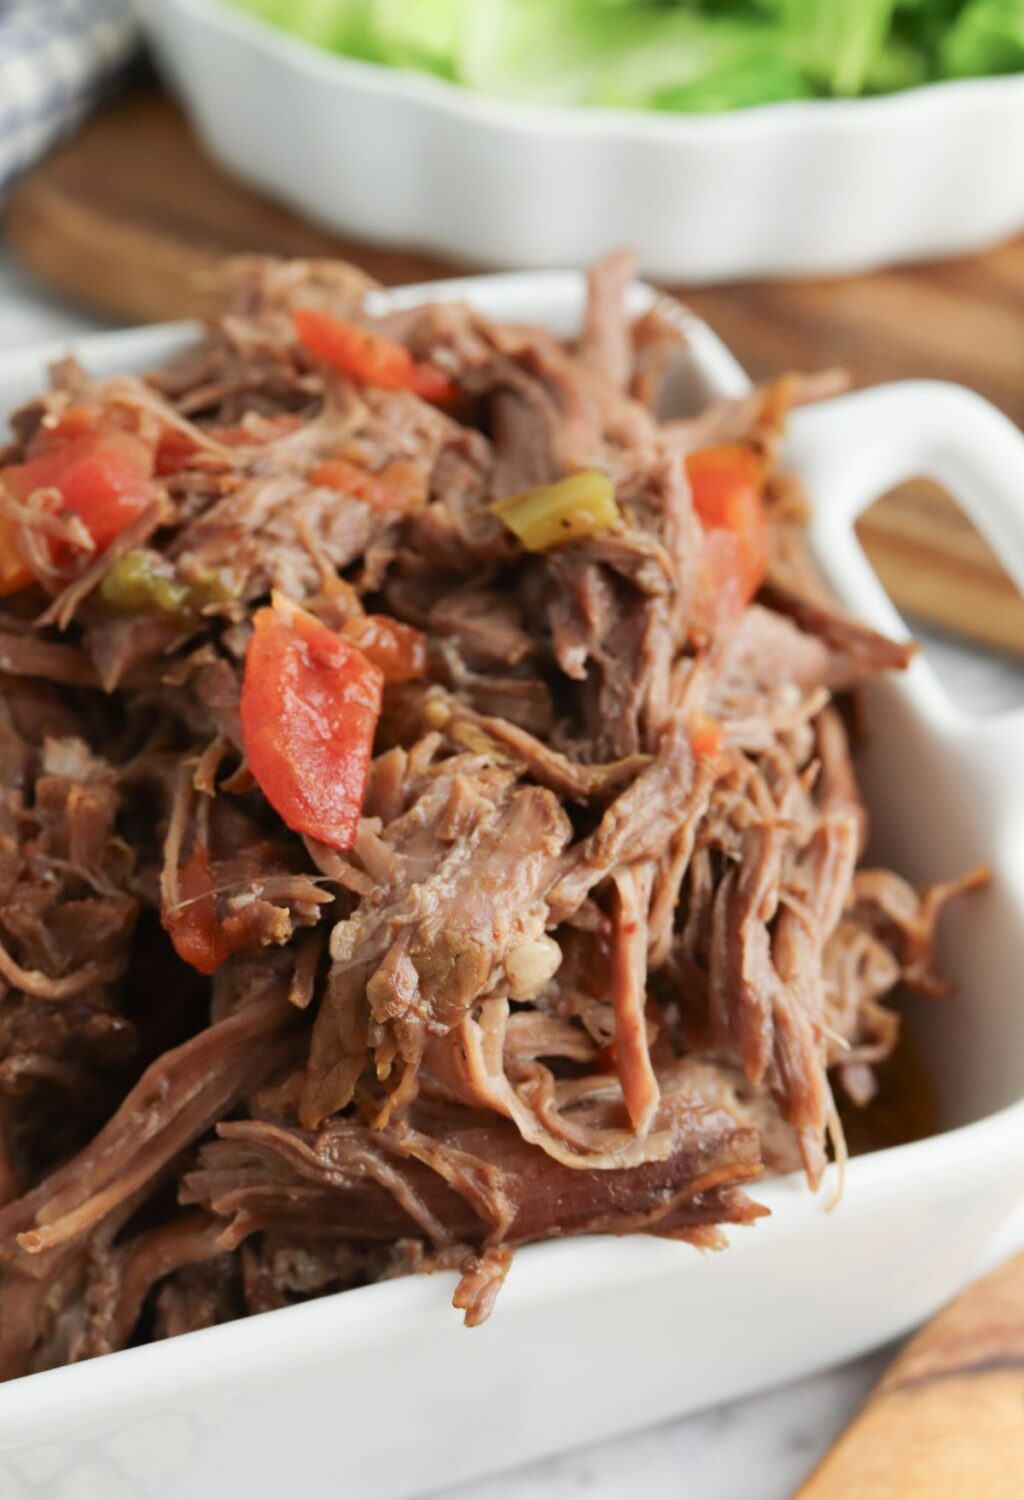 A white dish filled with shredded beef and vegetables.